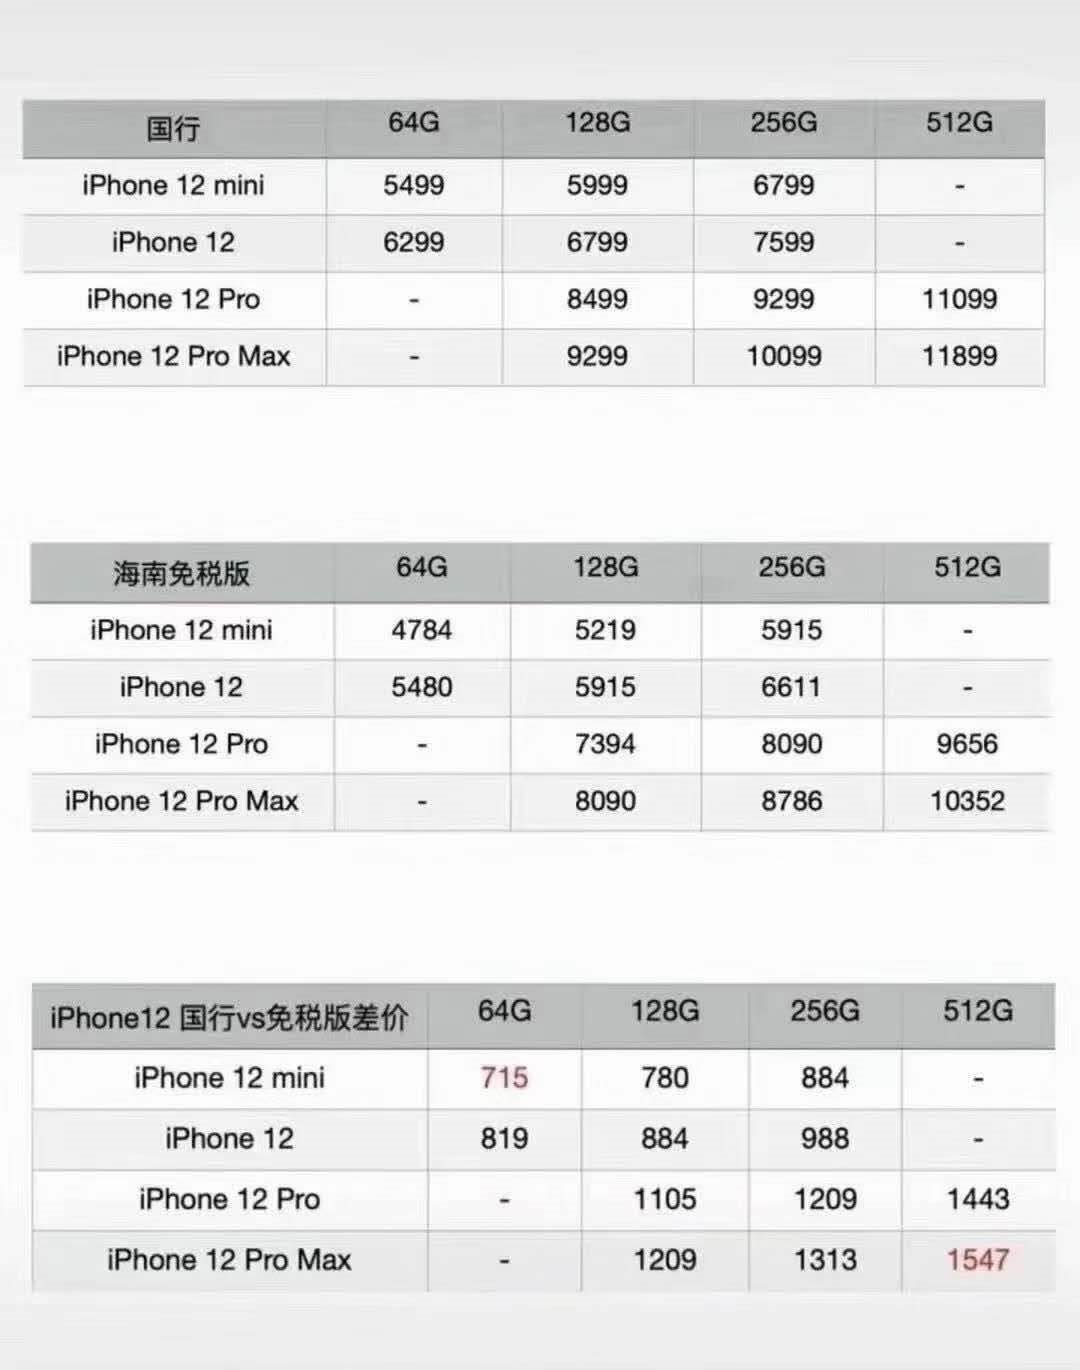 Low IPhone 12 is better bought! Hainan gives new rule: Tax free article but express comes home